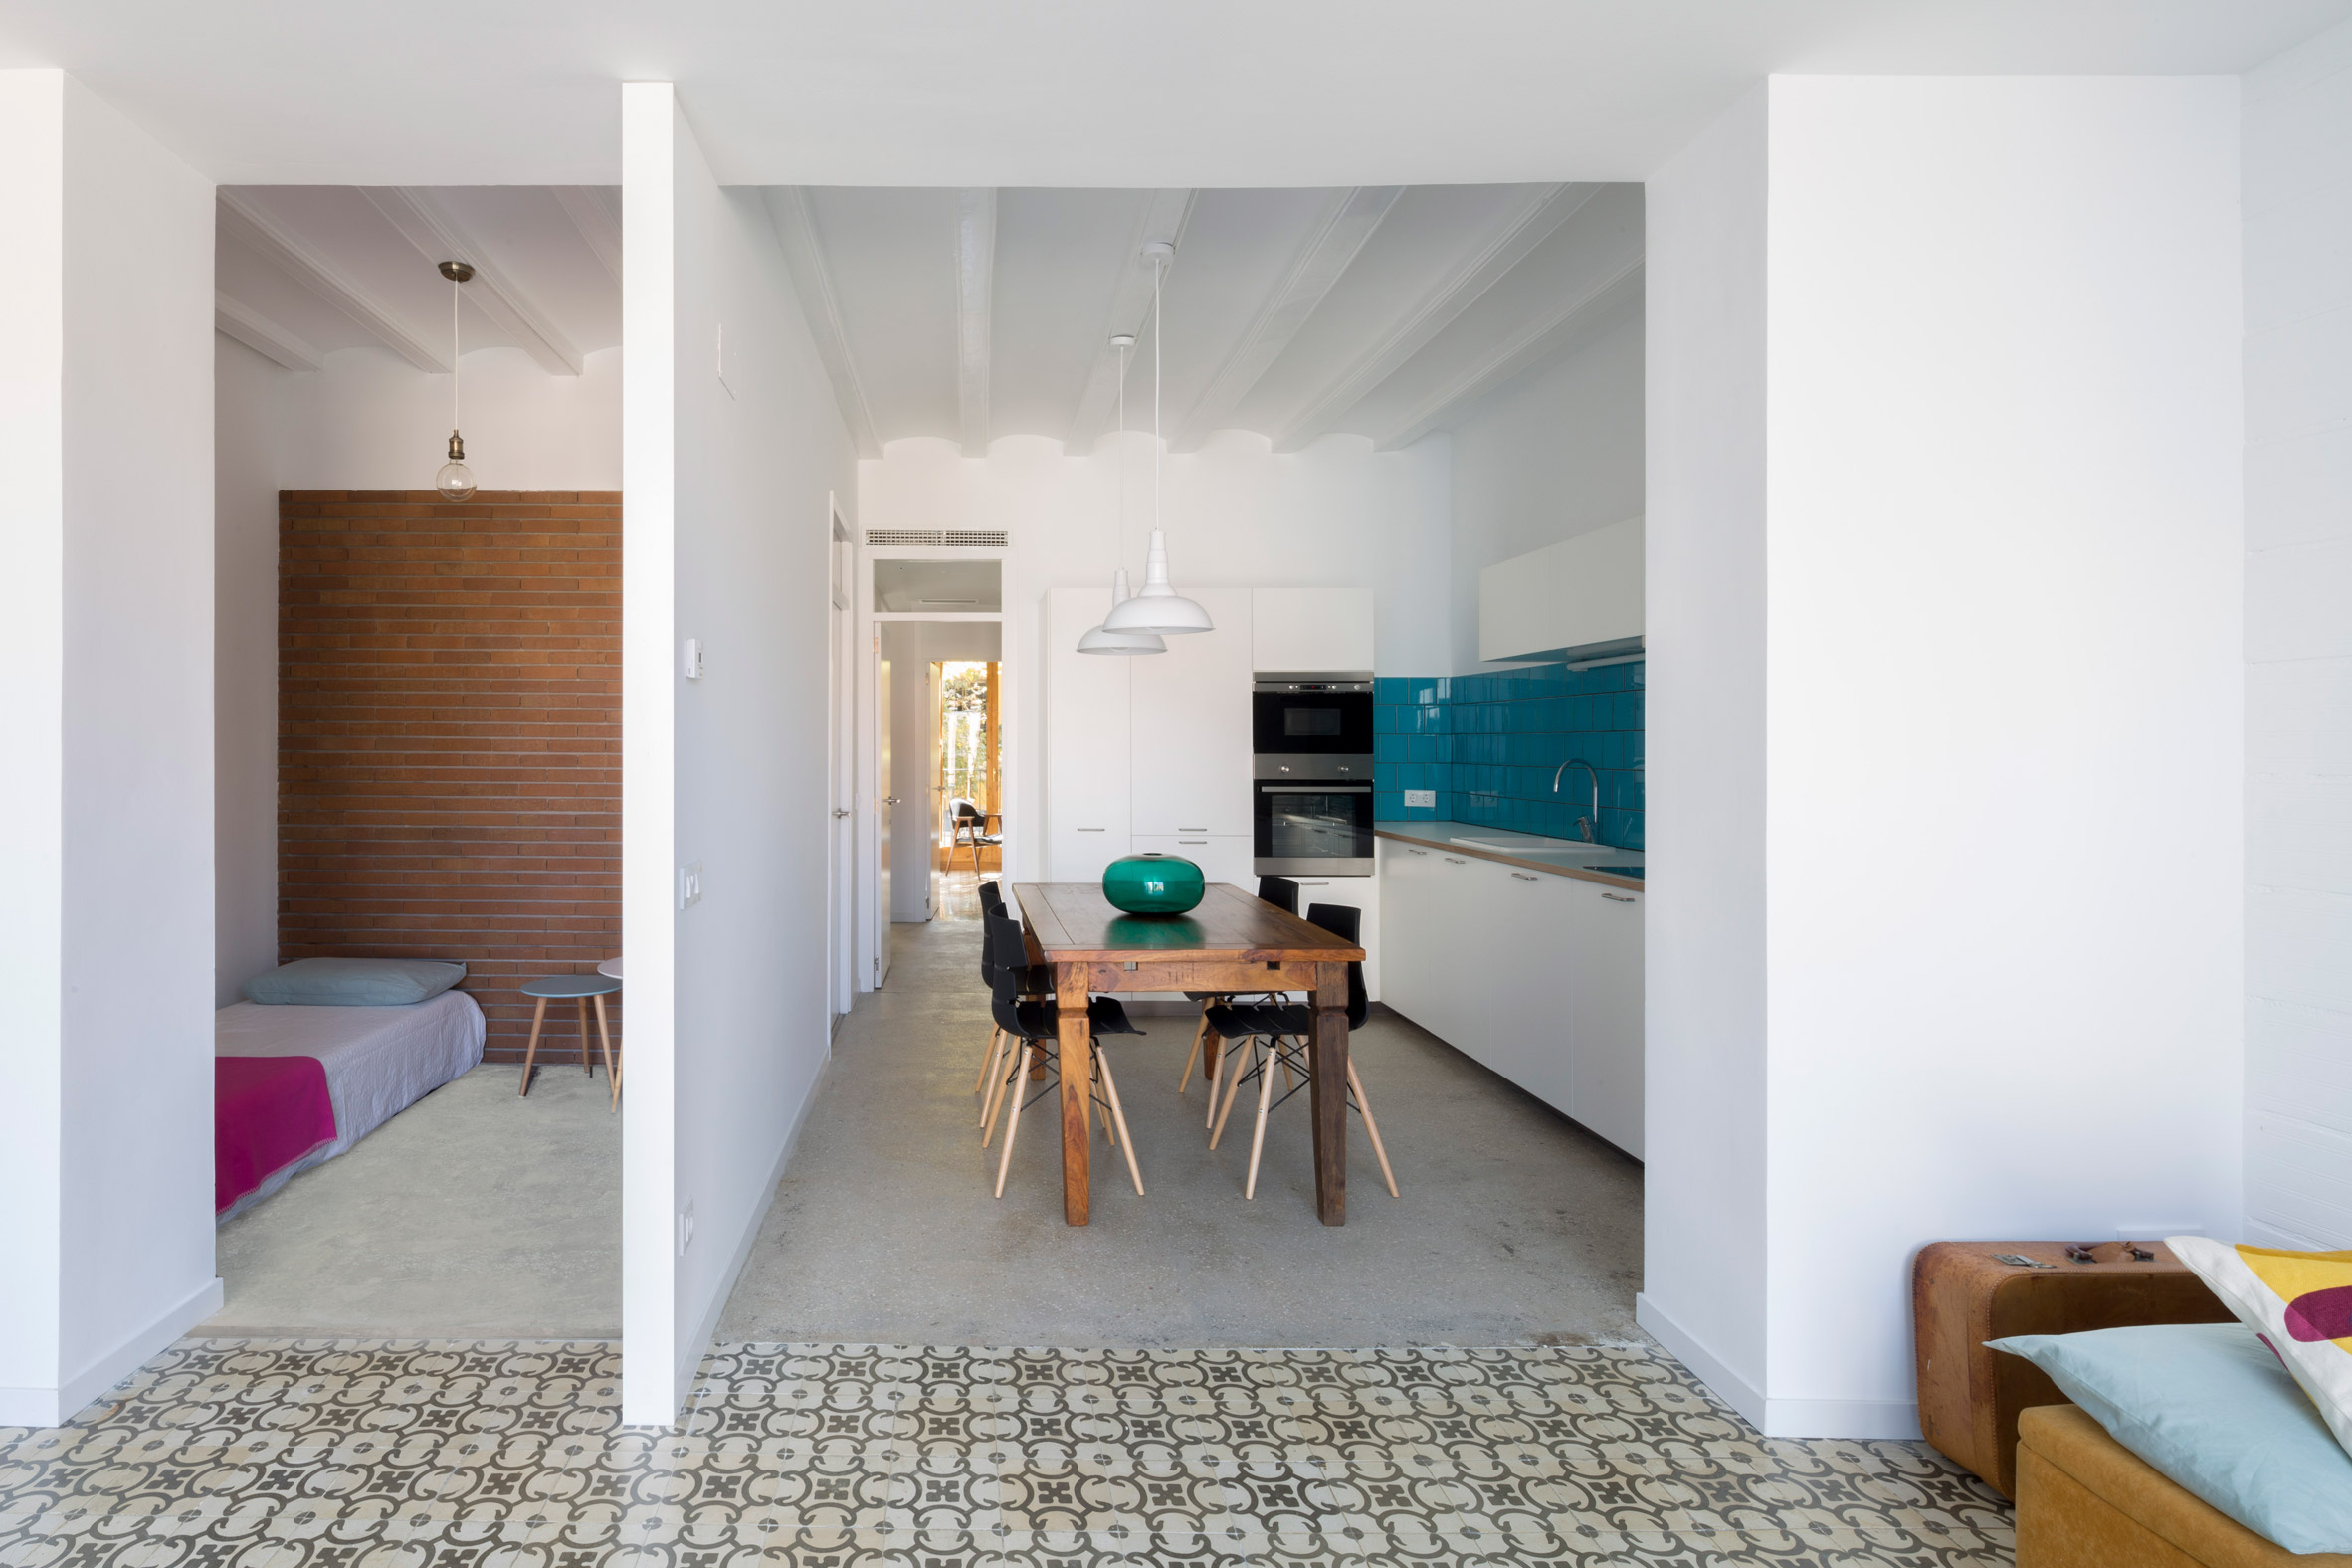 bed-and-blue-nook-architects-interiors-residential-barcelona-spain-spanish-houses-phase-one_dezeen_2364_col_2extra